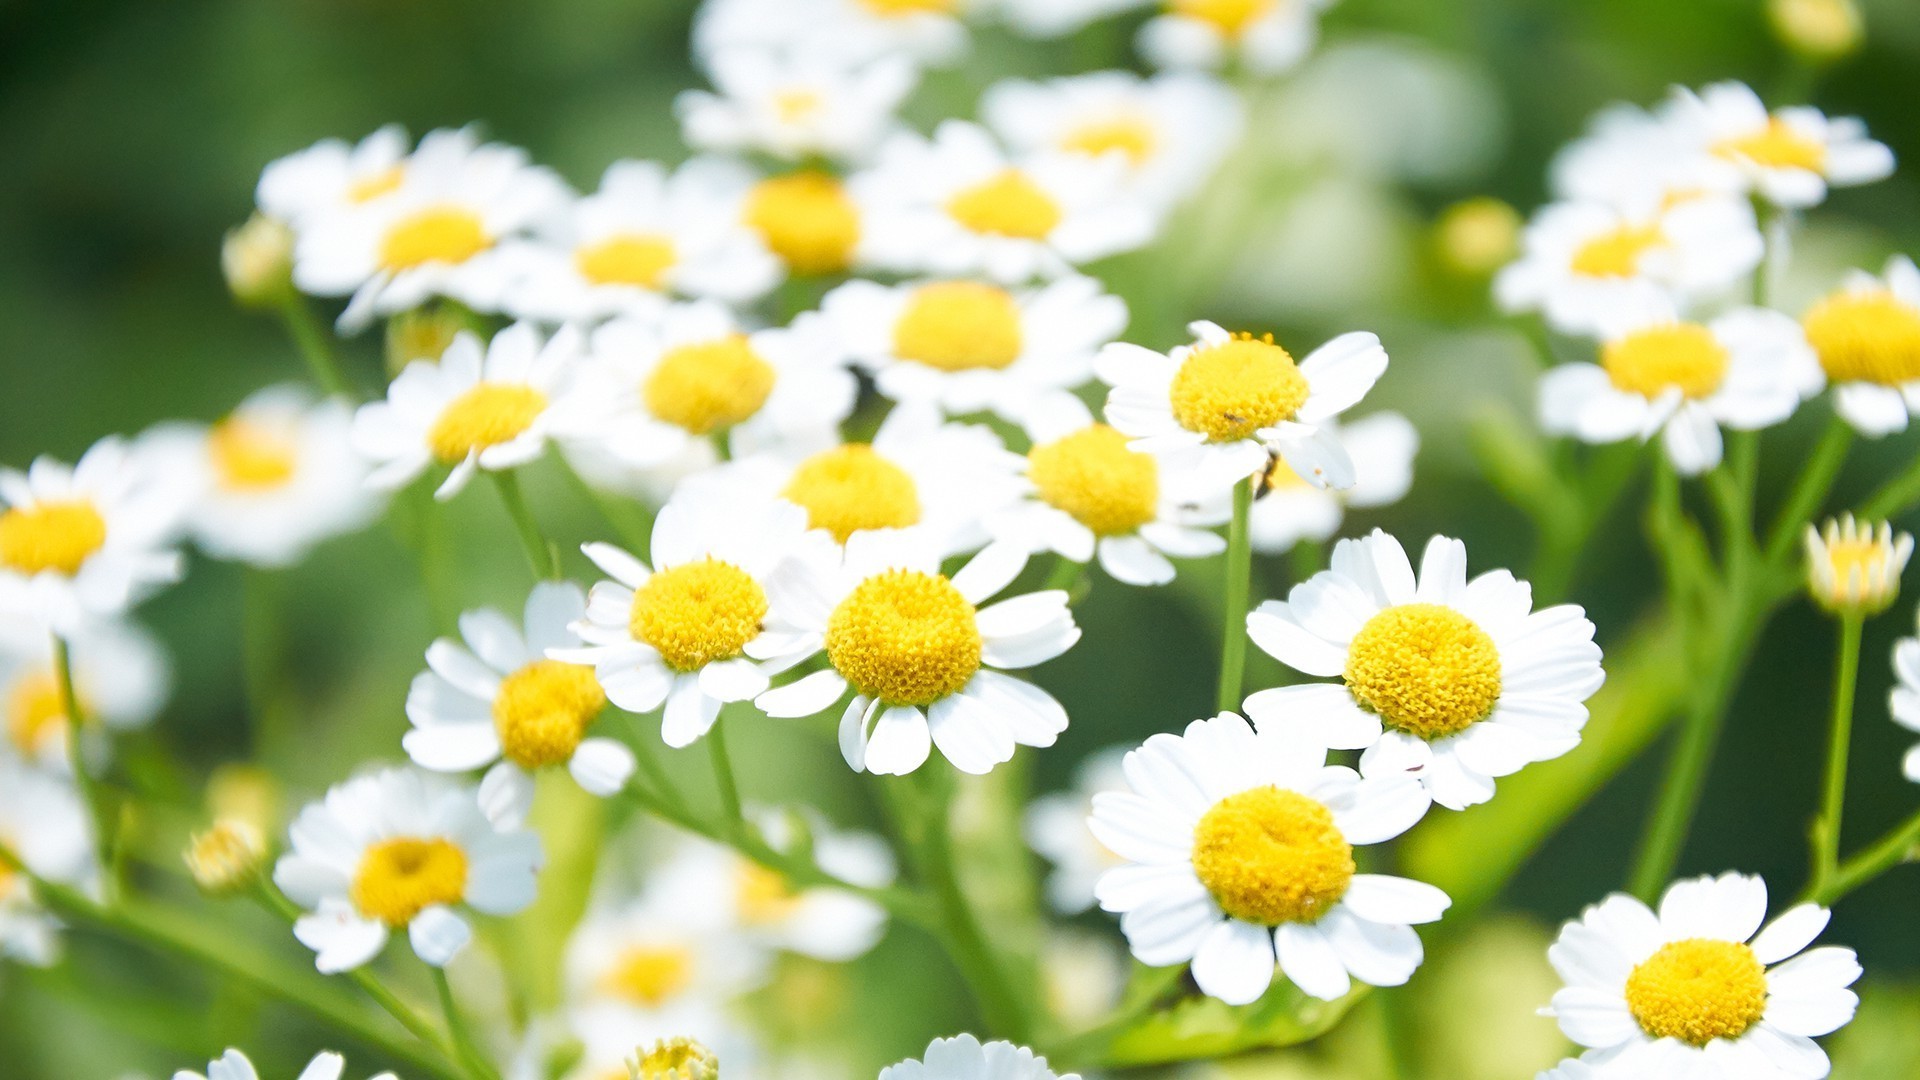 chamomile nature summer flora flower leaf hayfield bright garden petal fair weather field growth herbal color grass blooming floral close-up